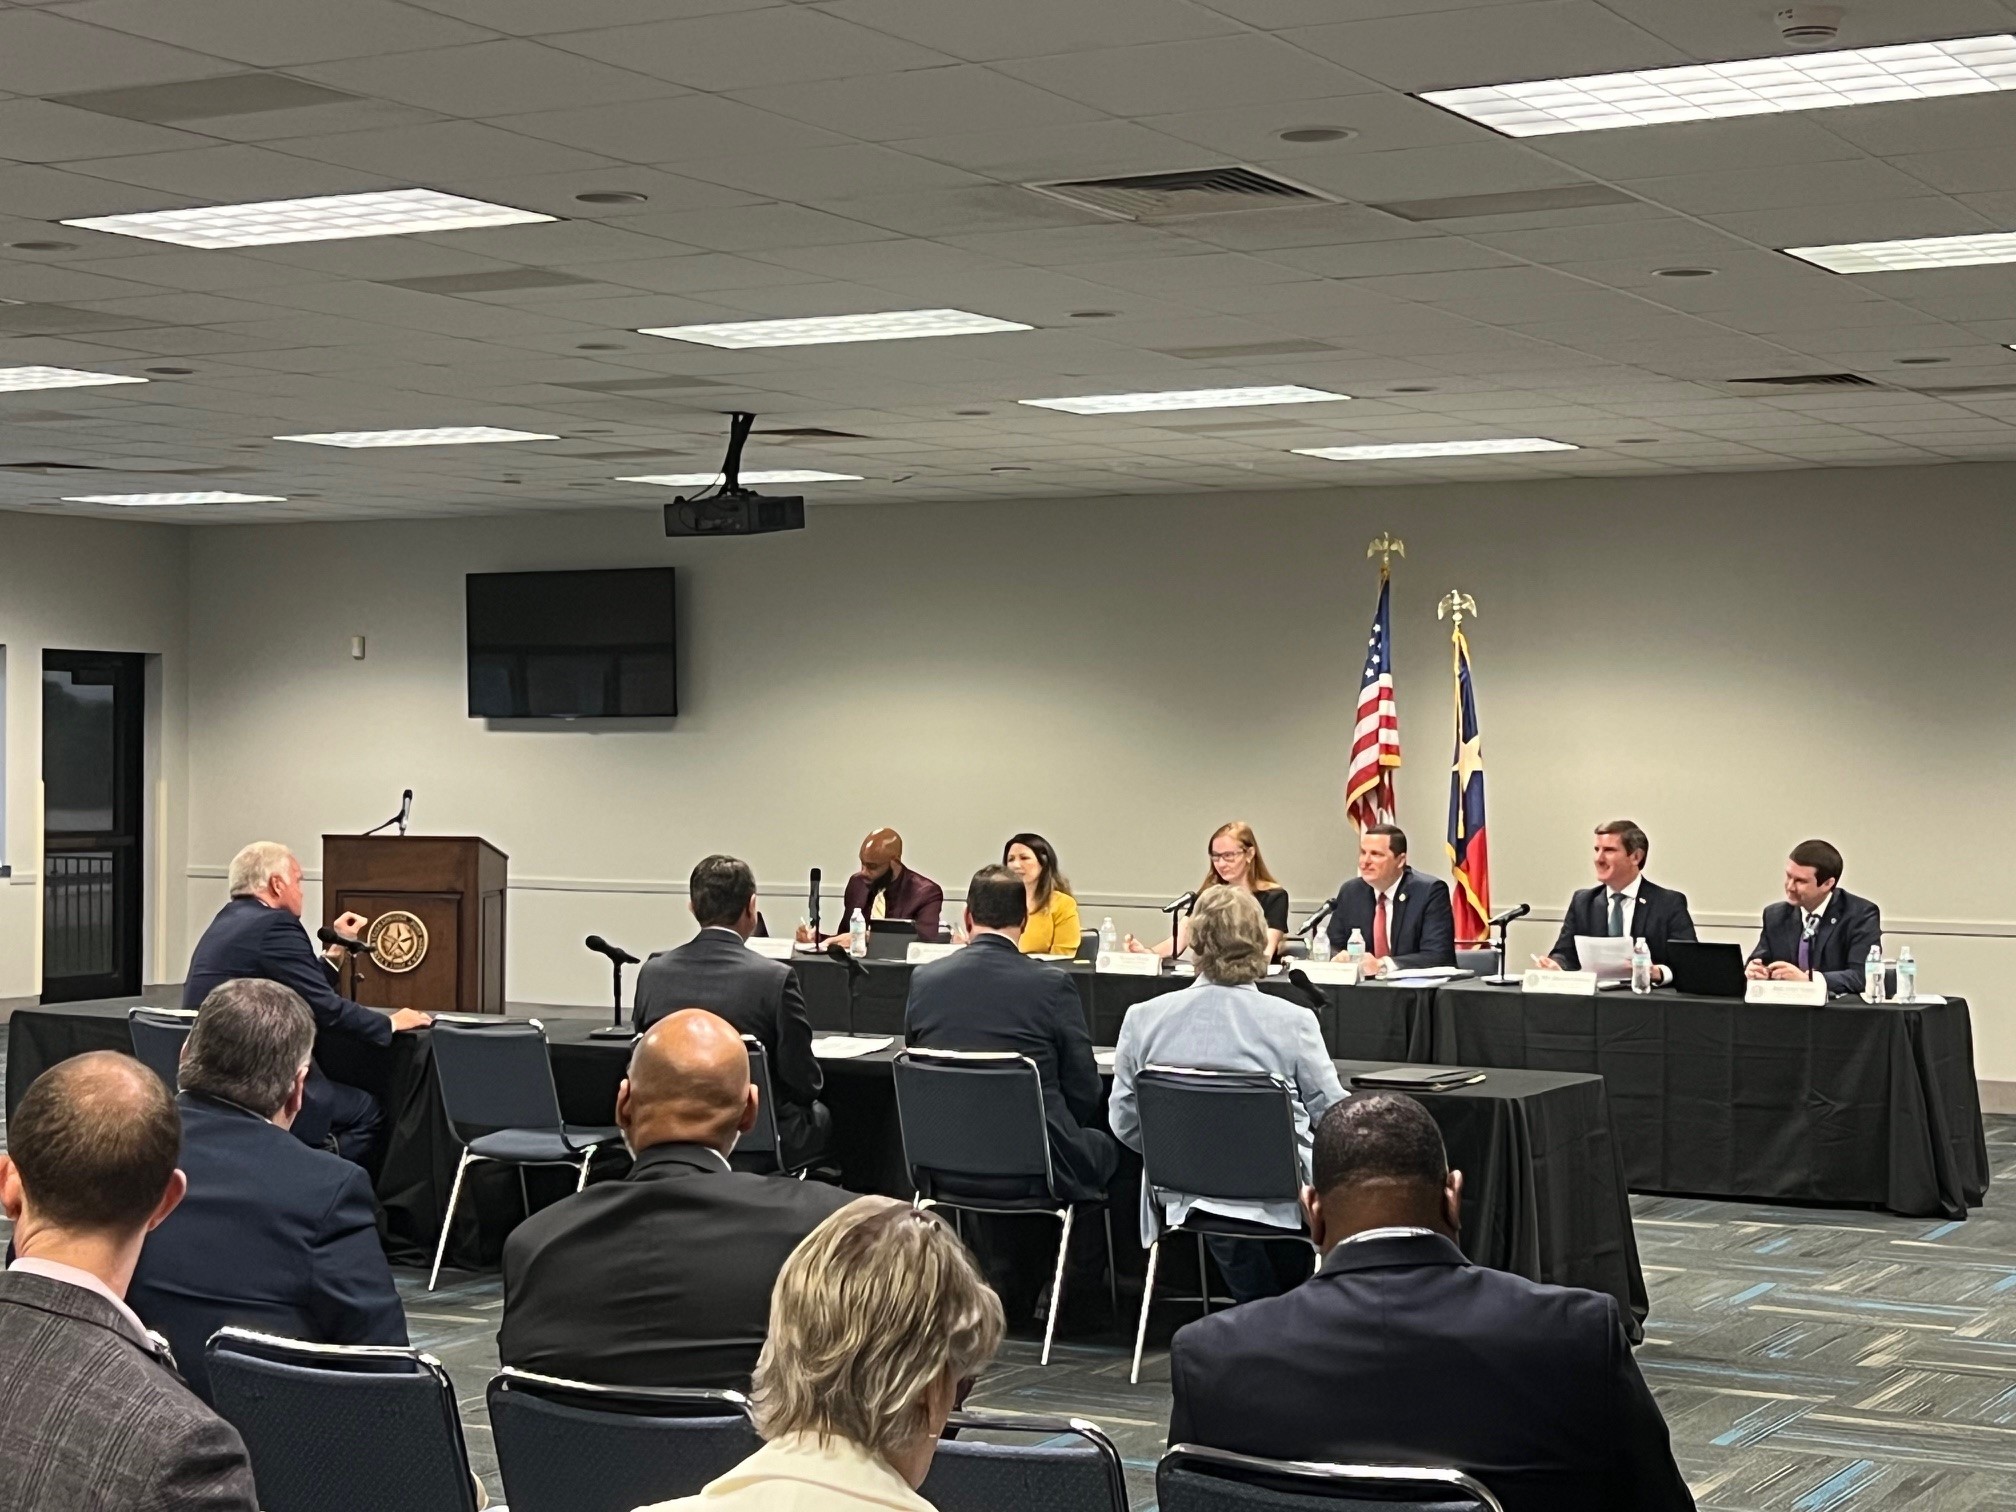 Commissioner Christian testifying before the House Select Committee on Protecting Texas LNG Exports at Lamar State College in Port Arthur, TX.